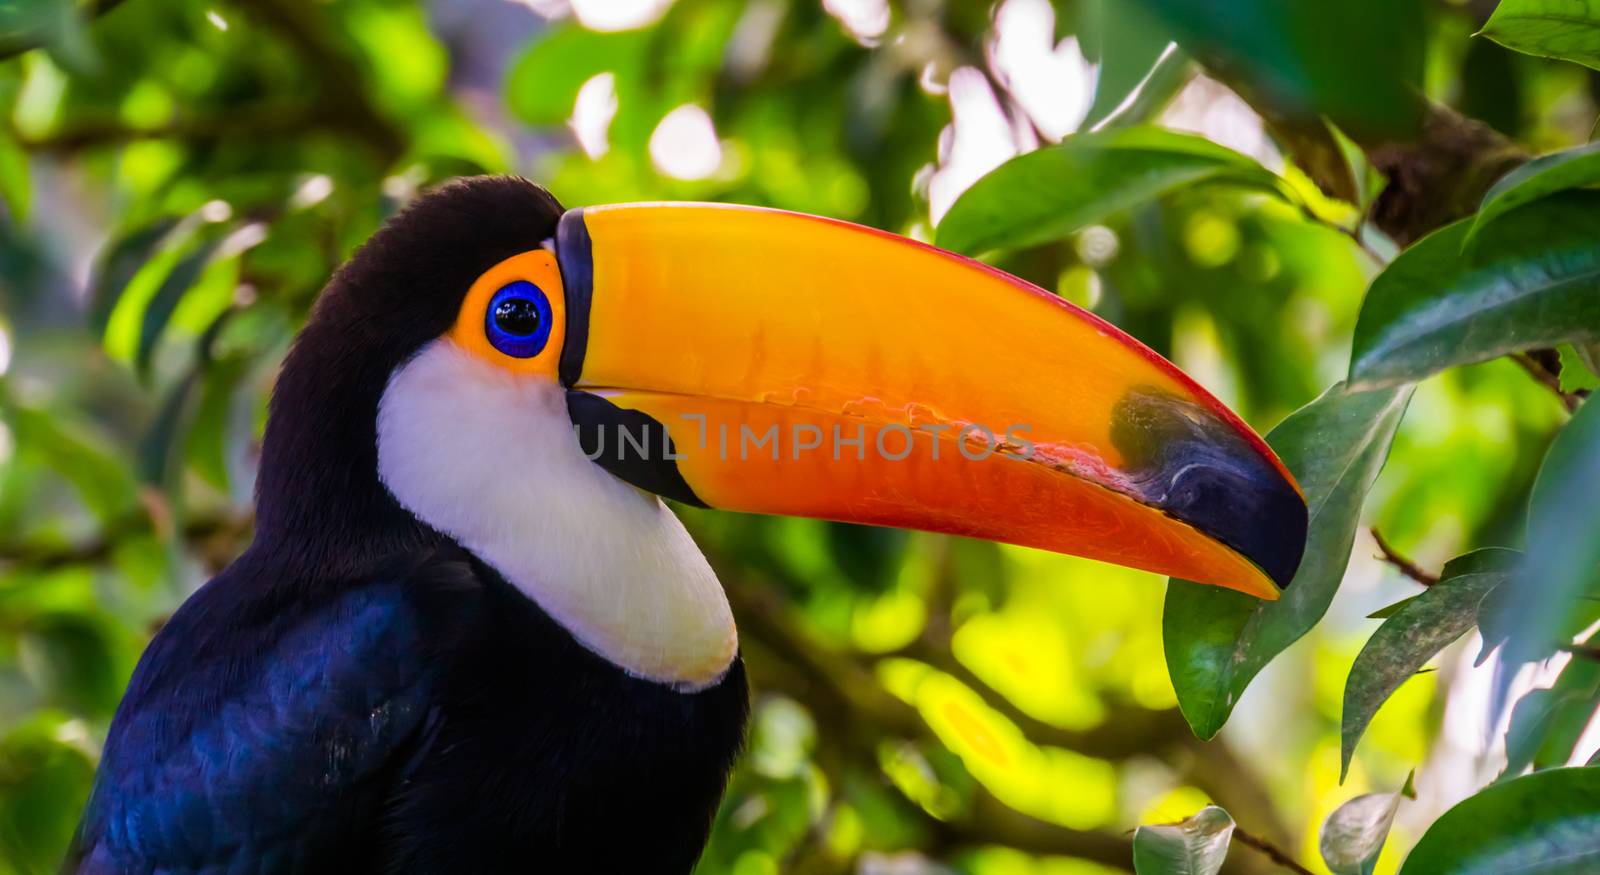 closeup portrait of the face of a toco toucan, tropical bird specie from America by charlottebleijenberg